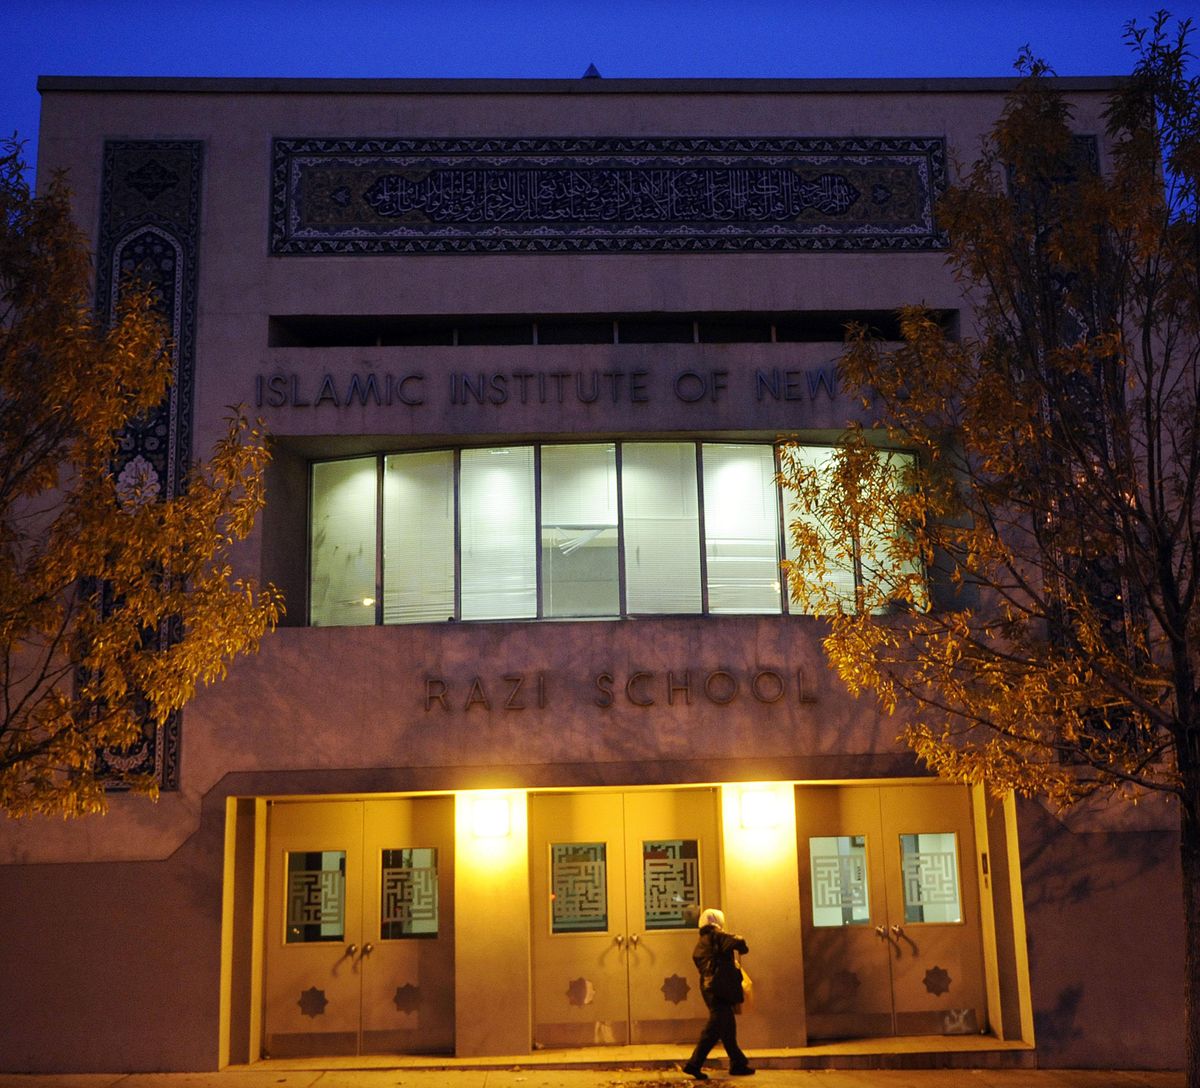 The Razi school is seen Thursday in Queens, New York. Federal prosecutors seek to seize four U.S. mosques and a skyscraper owned by a Muslim nonprofit suspected of being controlled by the Iranian government.  (Associated Press)